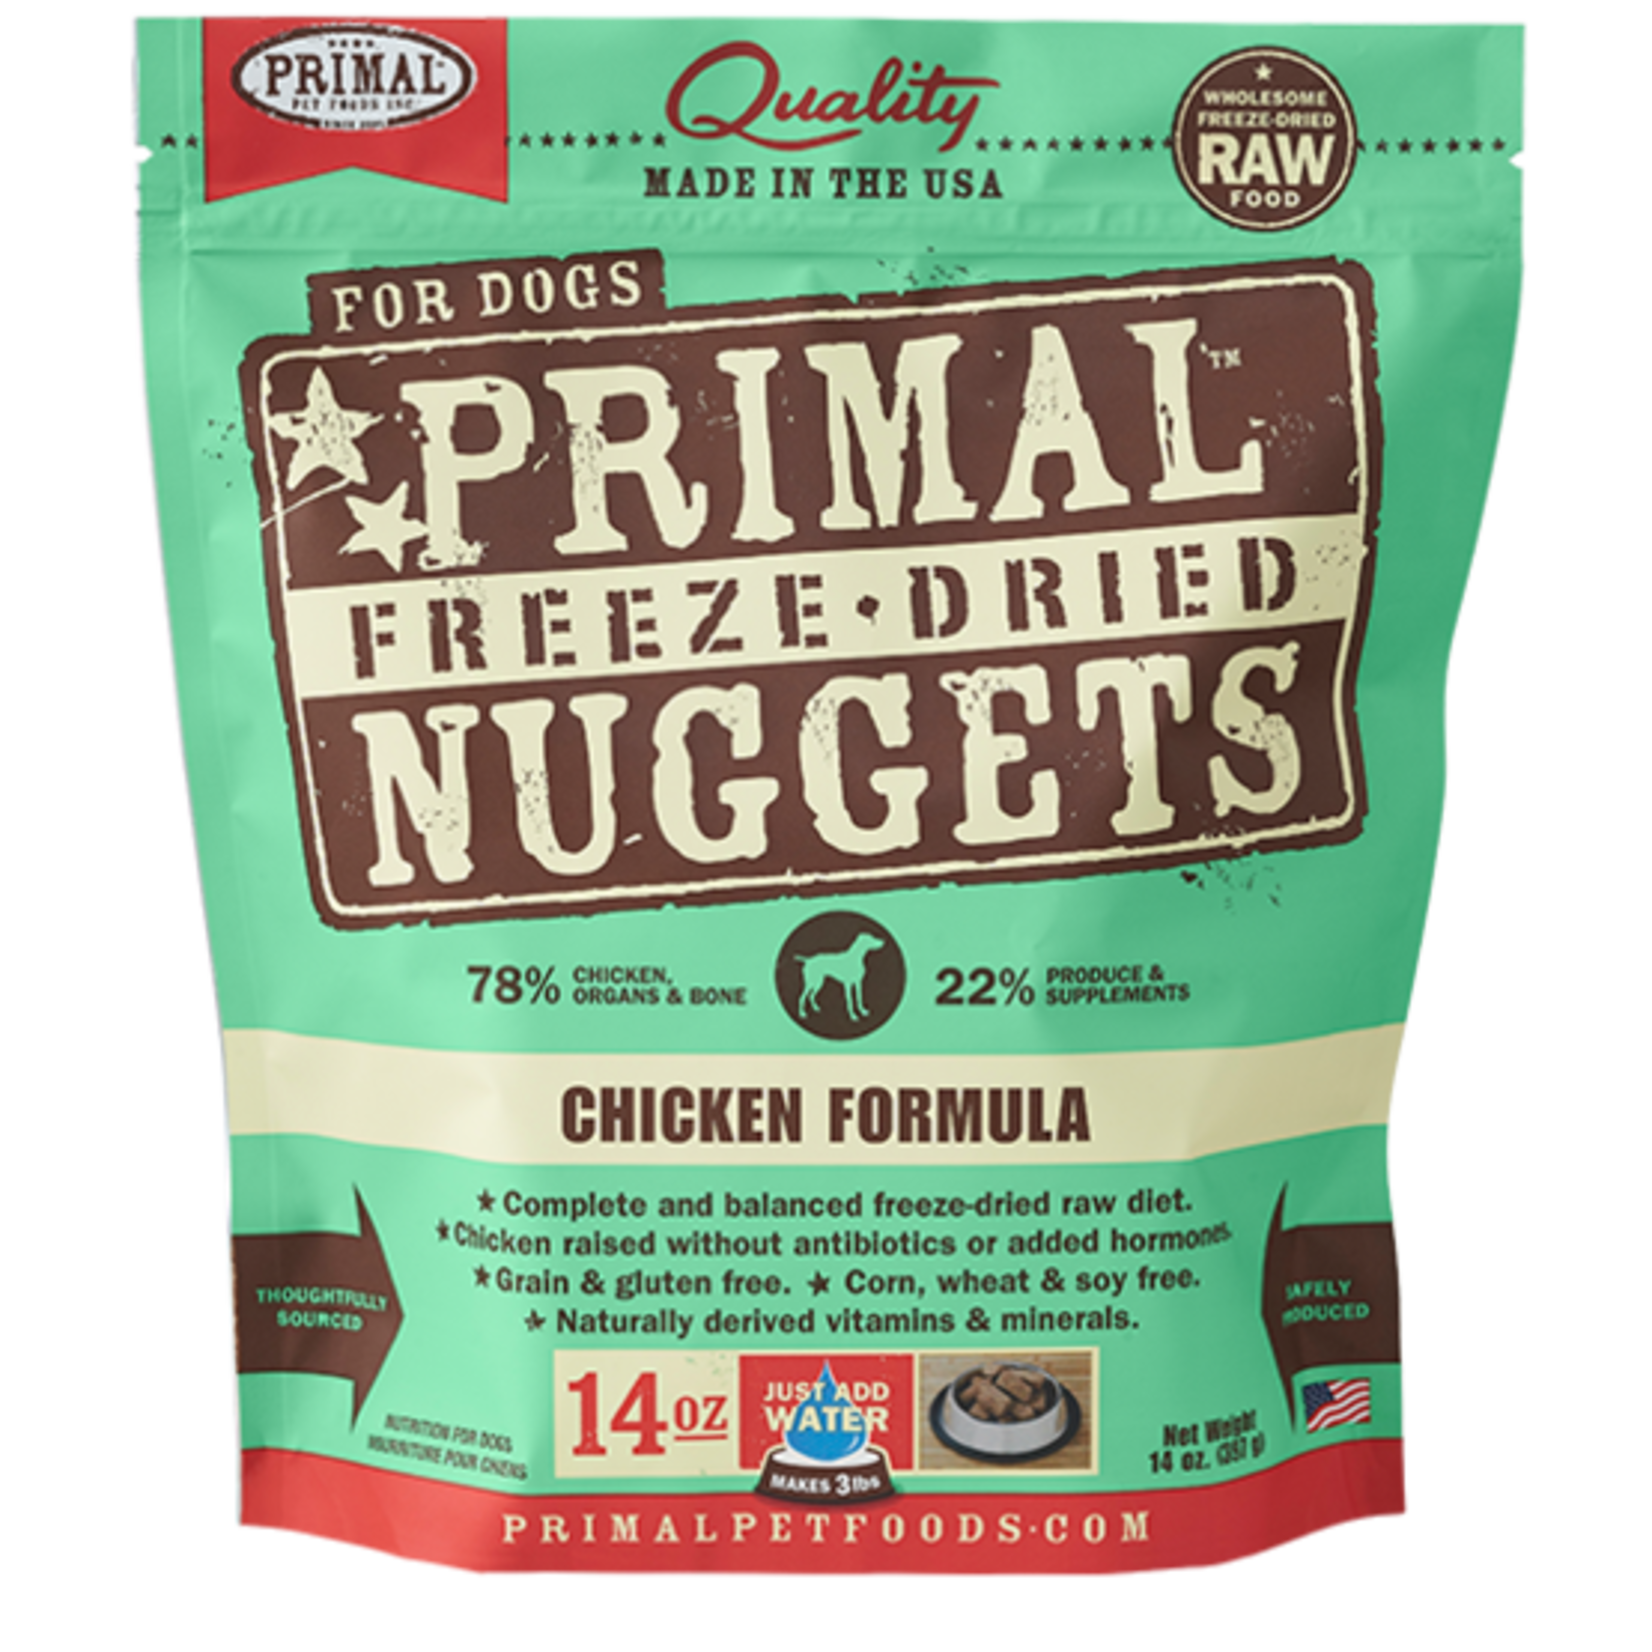 Primal Pet Foods Primal Canine Raw Freeze-Dried Nuggets Chicken